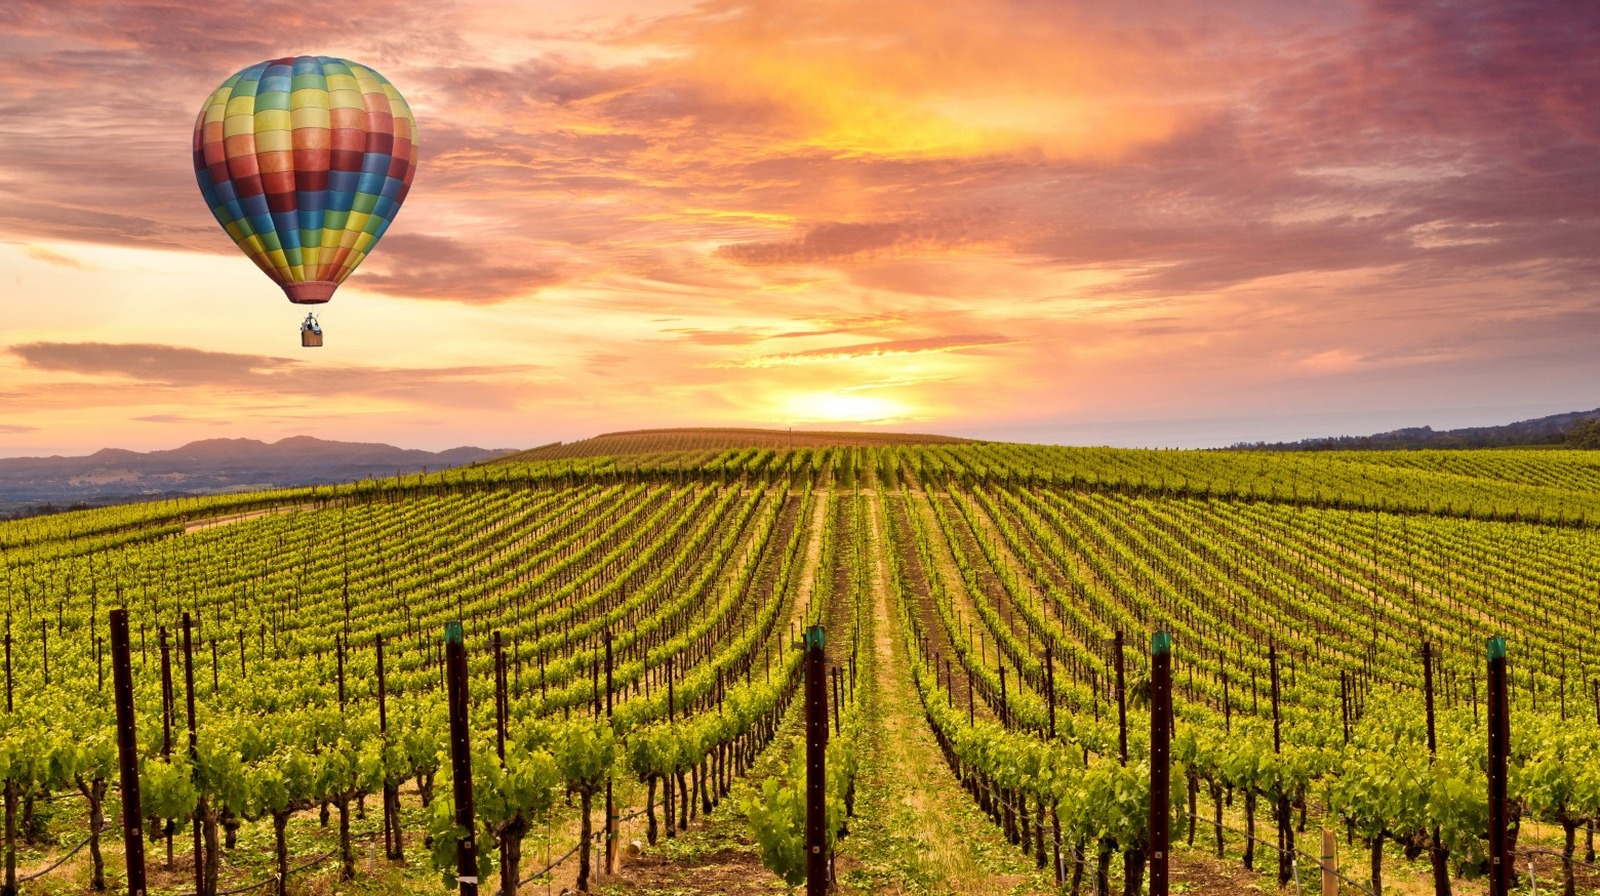 Learn about Napa Valley - California's Famous Wine Region